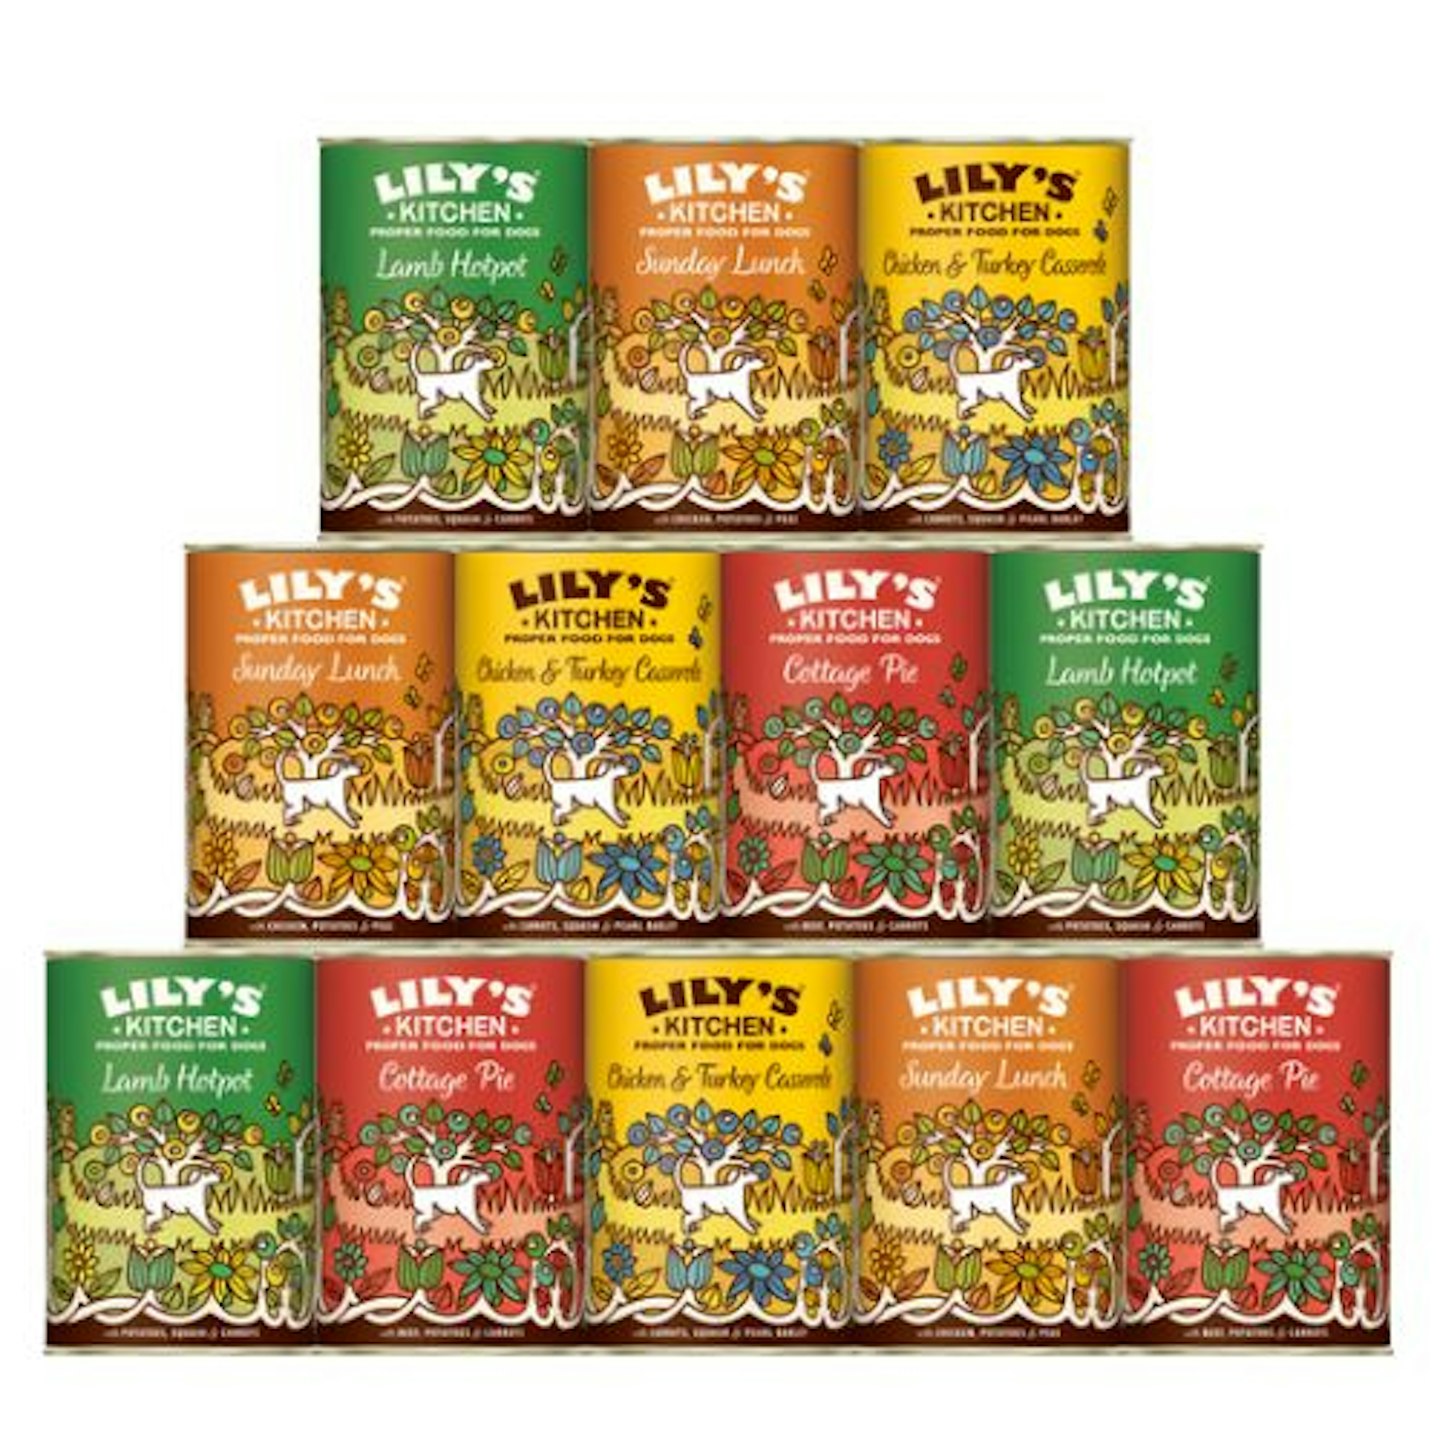 Lily's Kitchen Classic Dinner Multipack Wet Dog Food